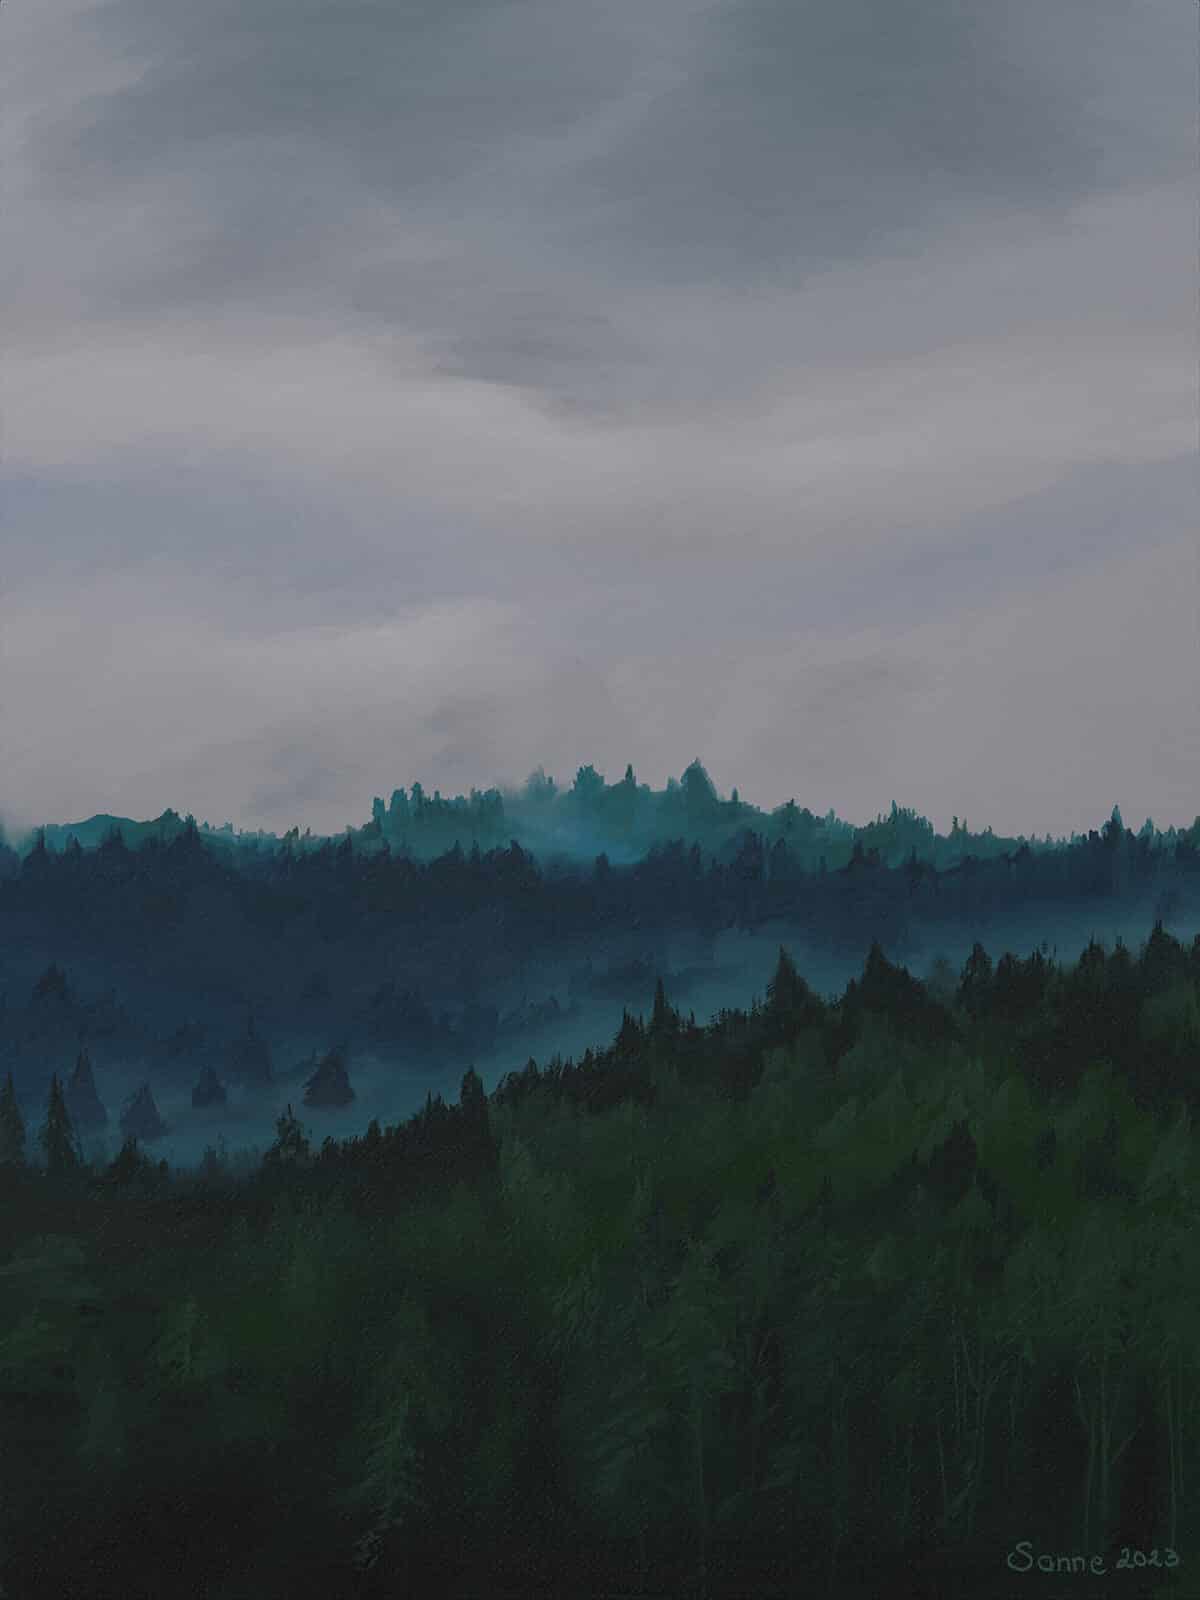 VR oil painting of a misty mountain range, covered in a dense forest. The dominant colors are deep hues of blue, moving towards green in the front.